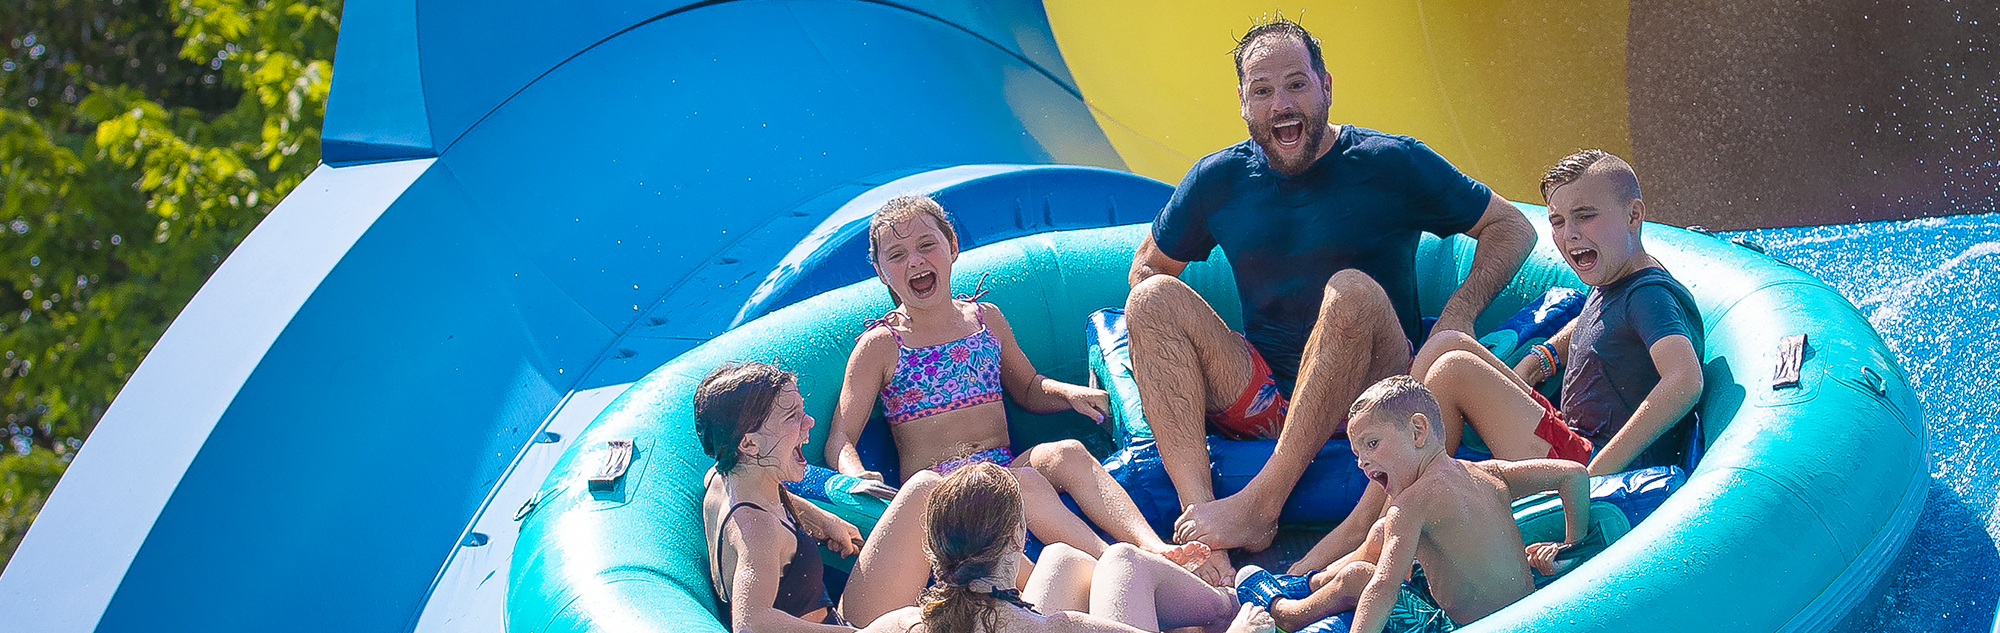 A family screams as they go over the top of a hill on Mammoth water coaster in Splashin' Safari.